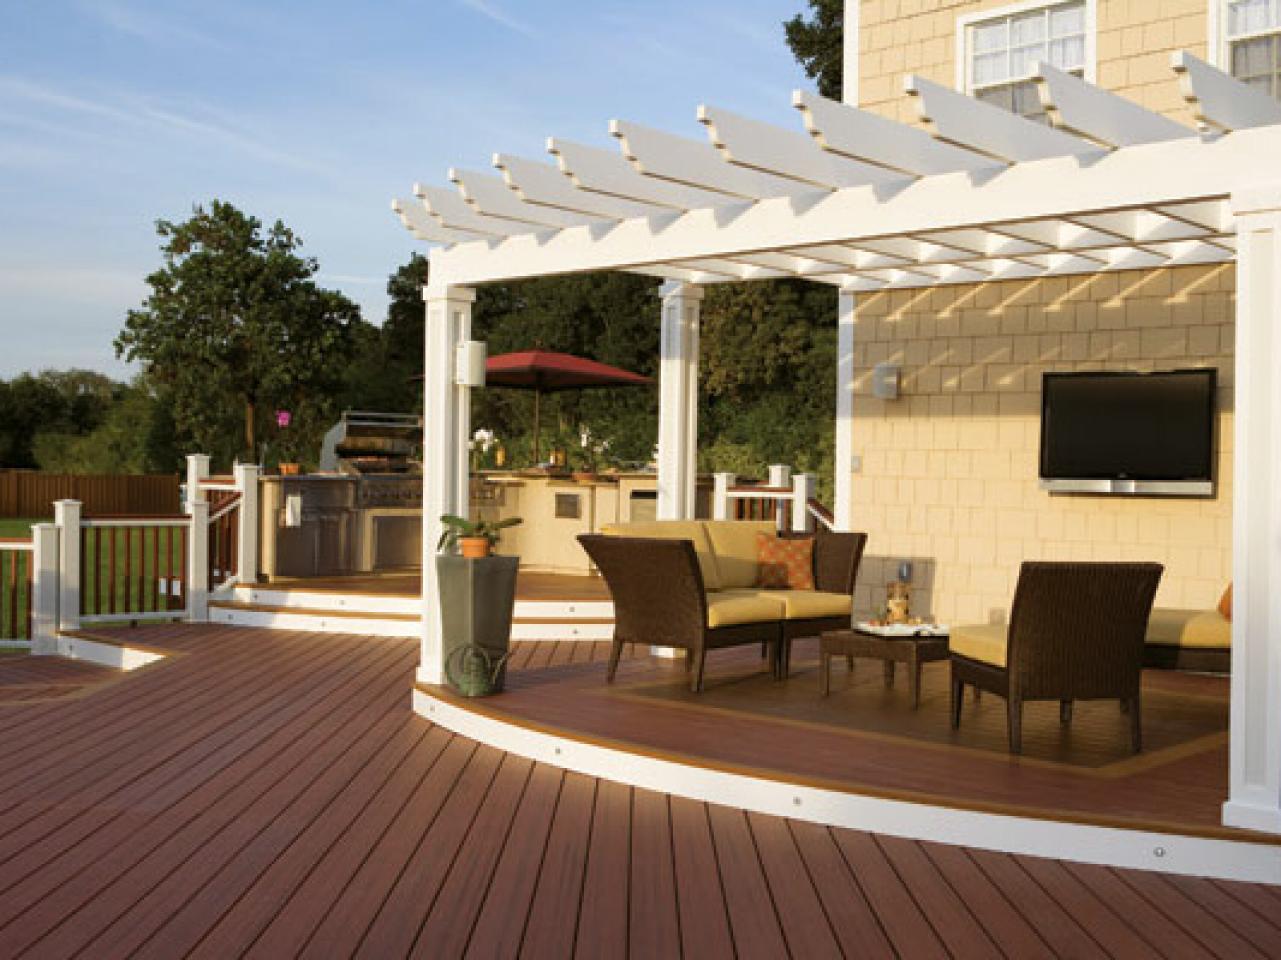 Shading Your Deck, Patio Wood Awning Designs